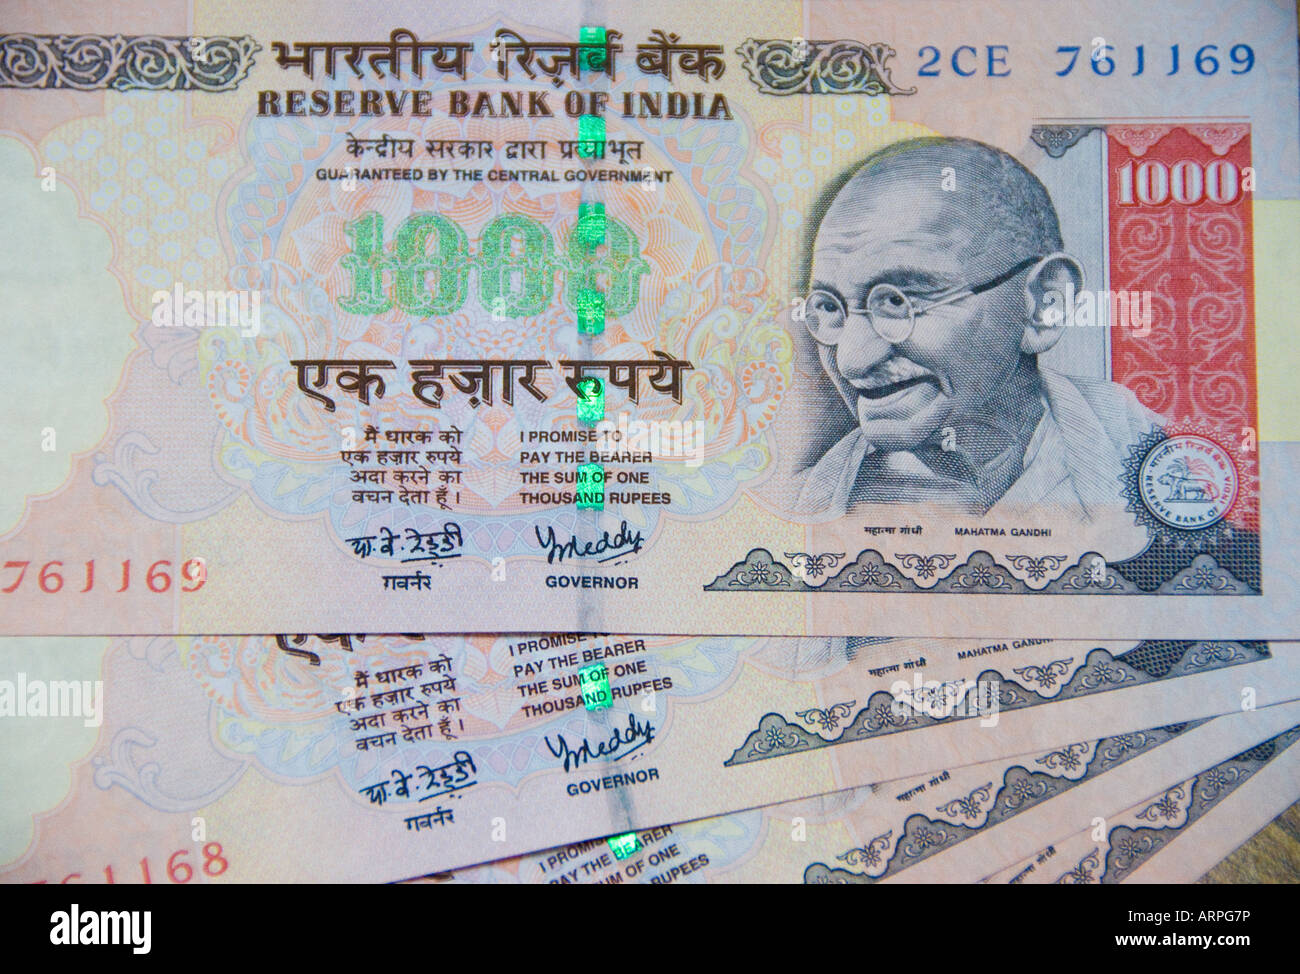 1000 Rupee Indian currency notes Stock Photo